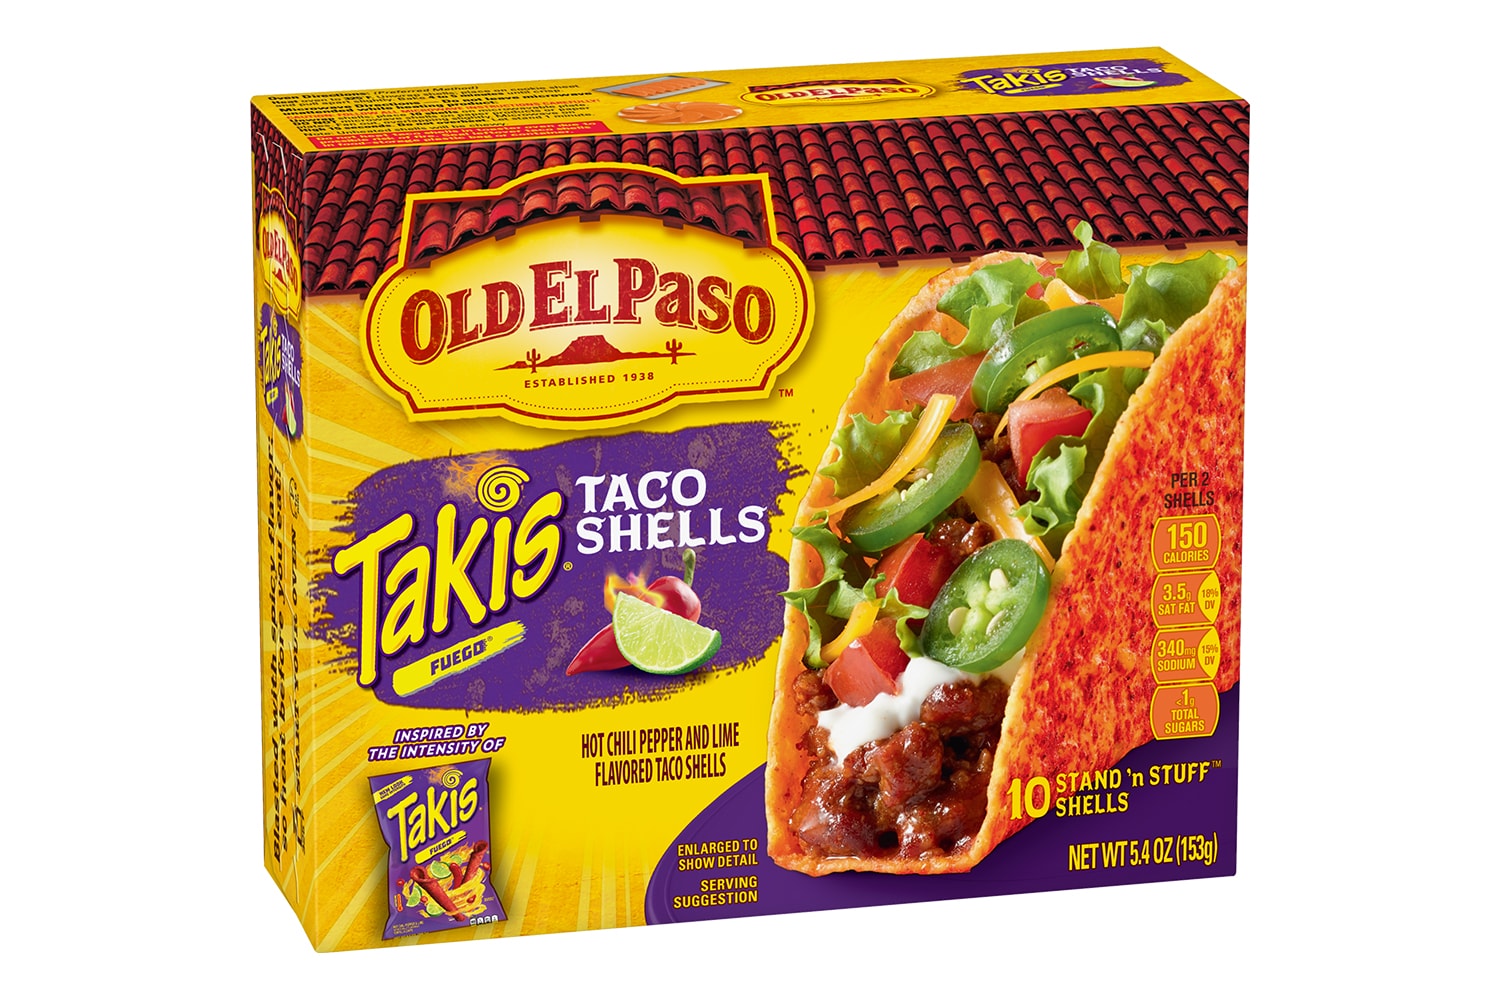 Old El Paso Takis Fuego Hot Chili Pepper Lime-Flavored Stand 'N Stuff Taco Shells Release Info Taste Review